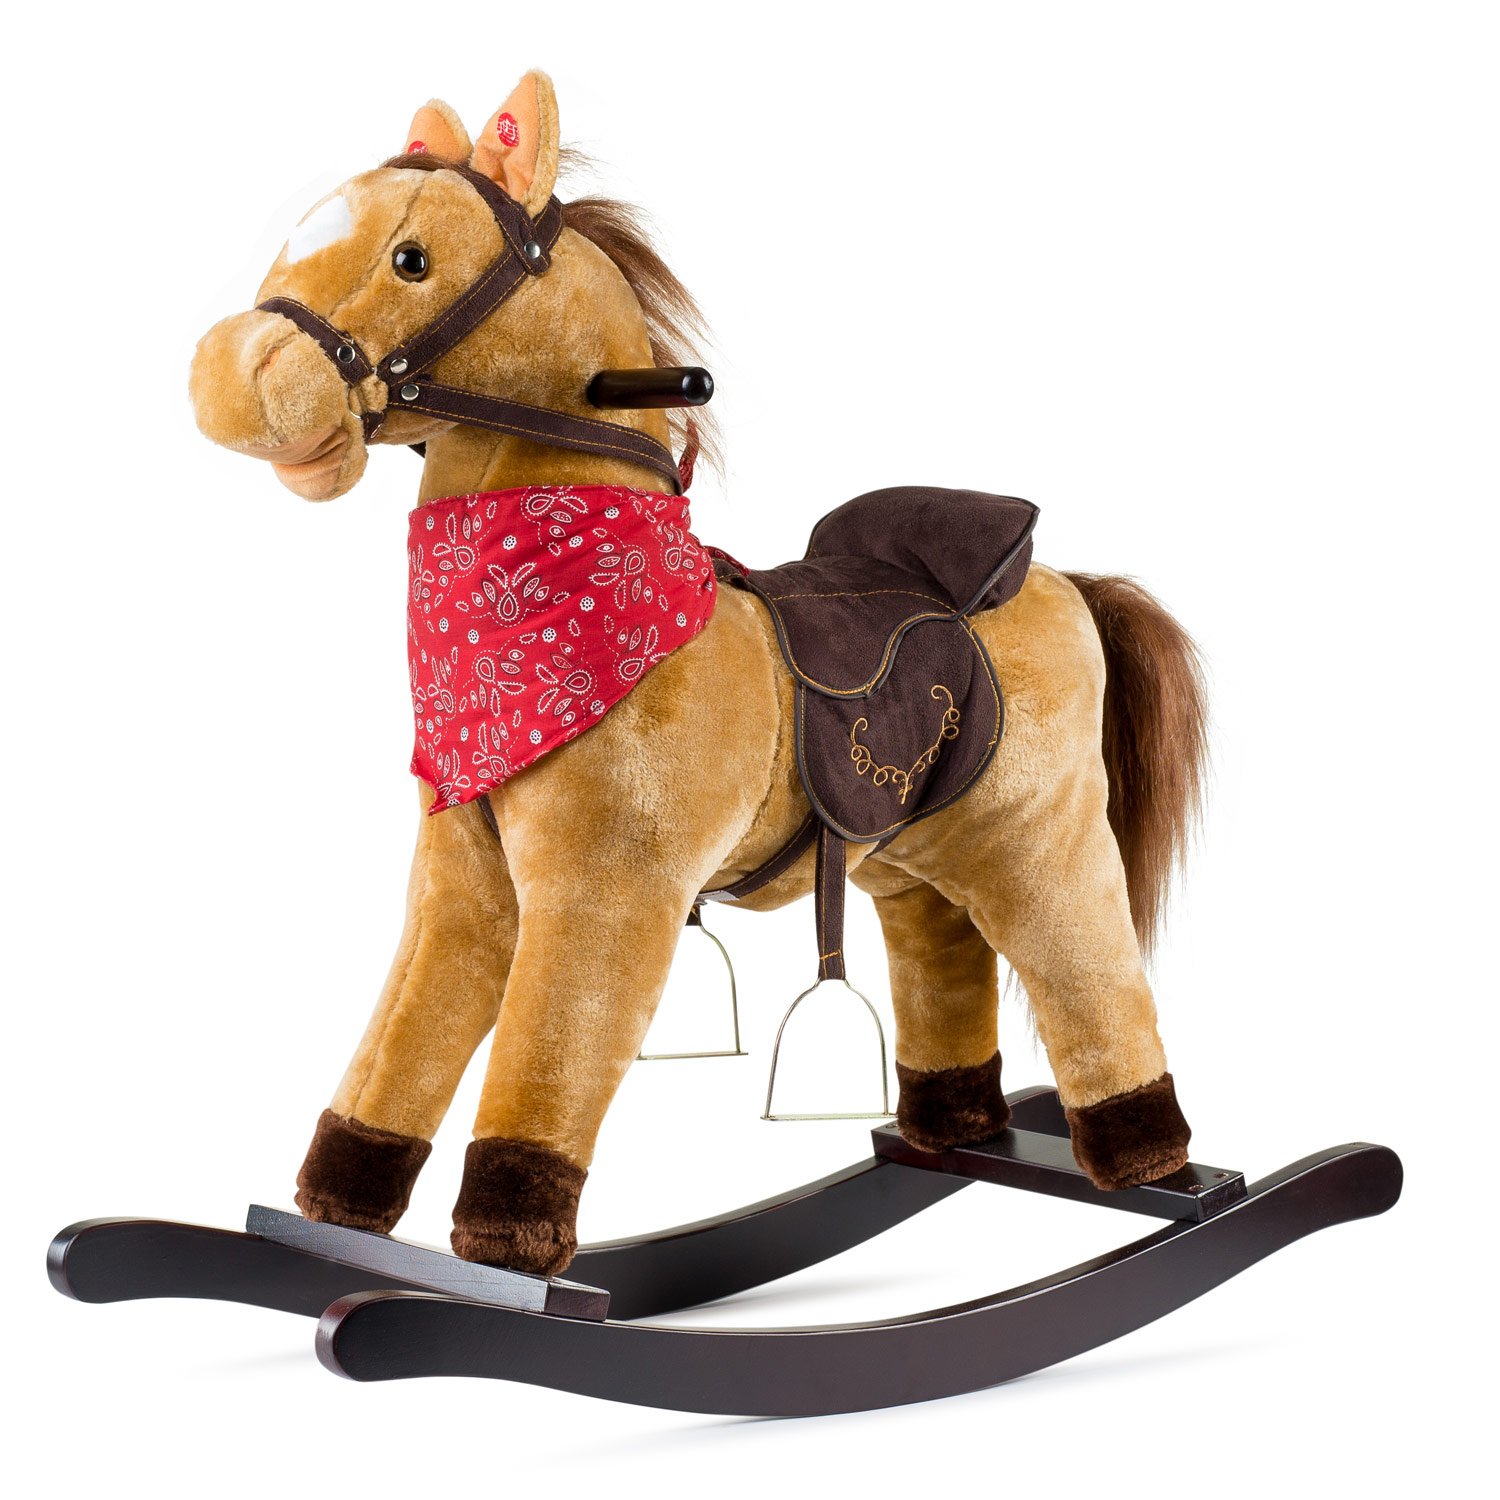 Top 9 Best Rocking Horses Toy Reviews in 2022 4